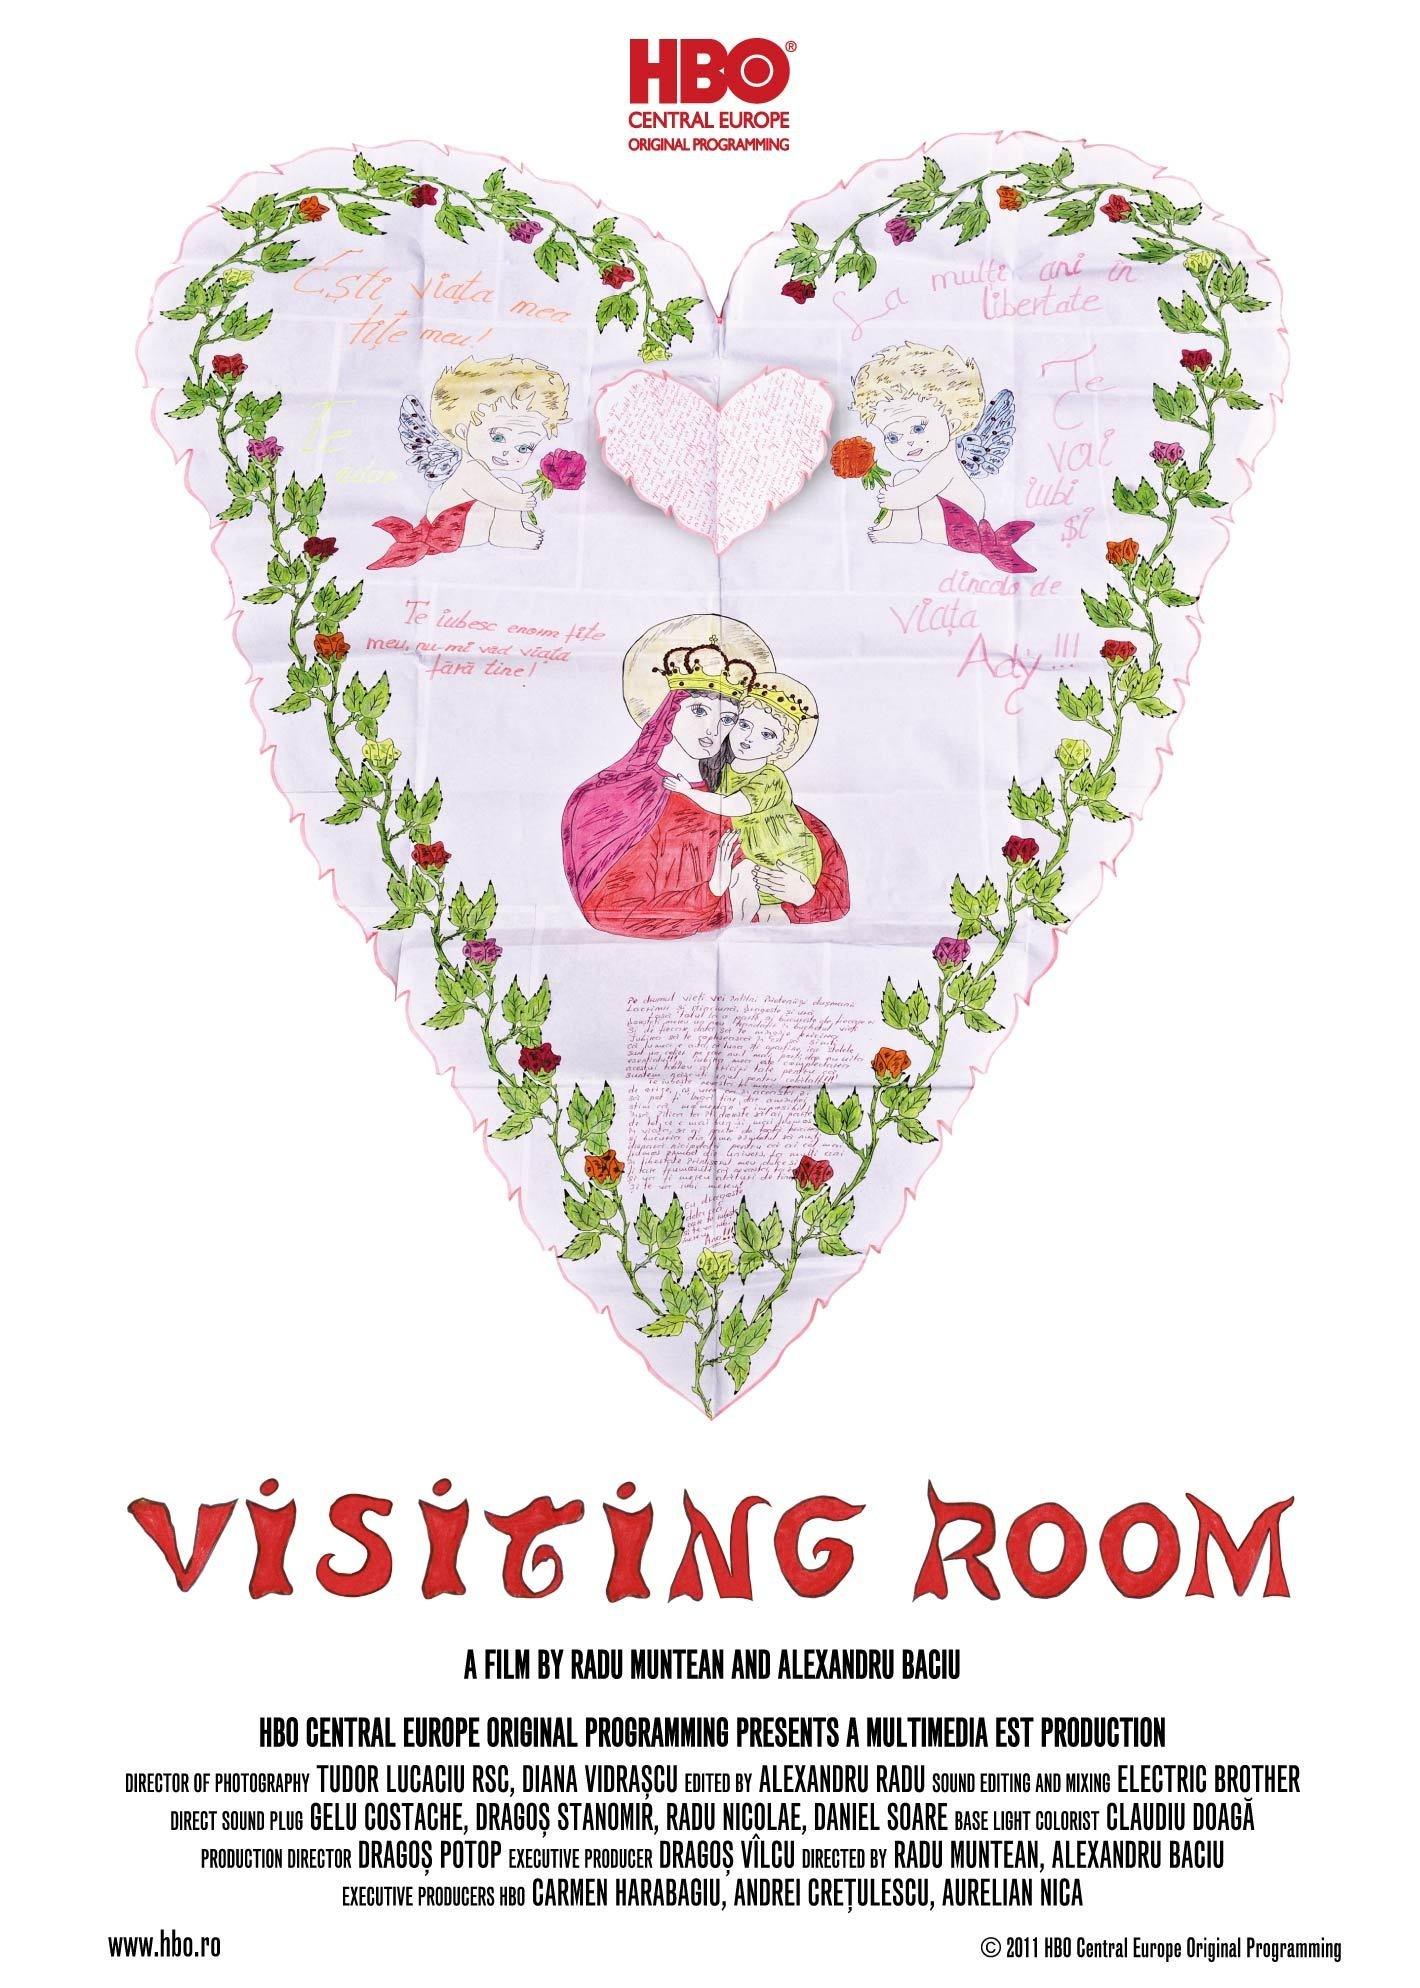 Visiting room